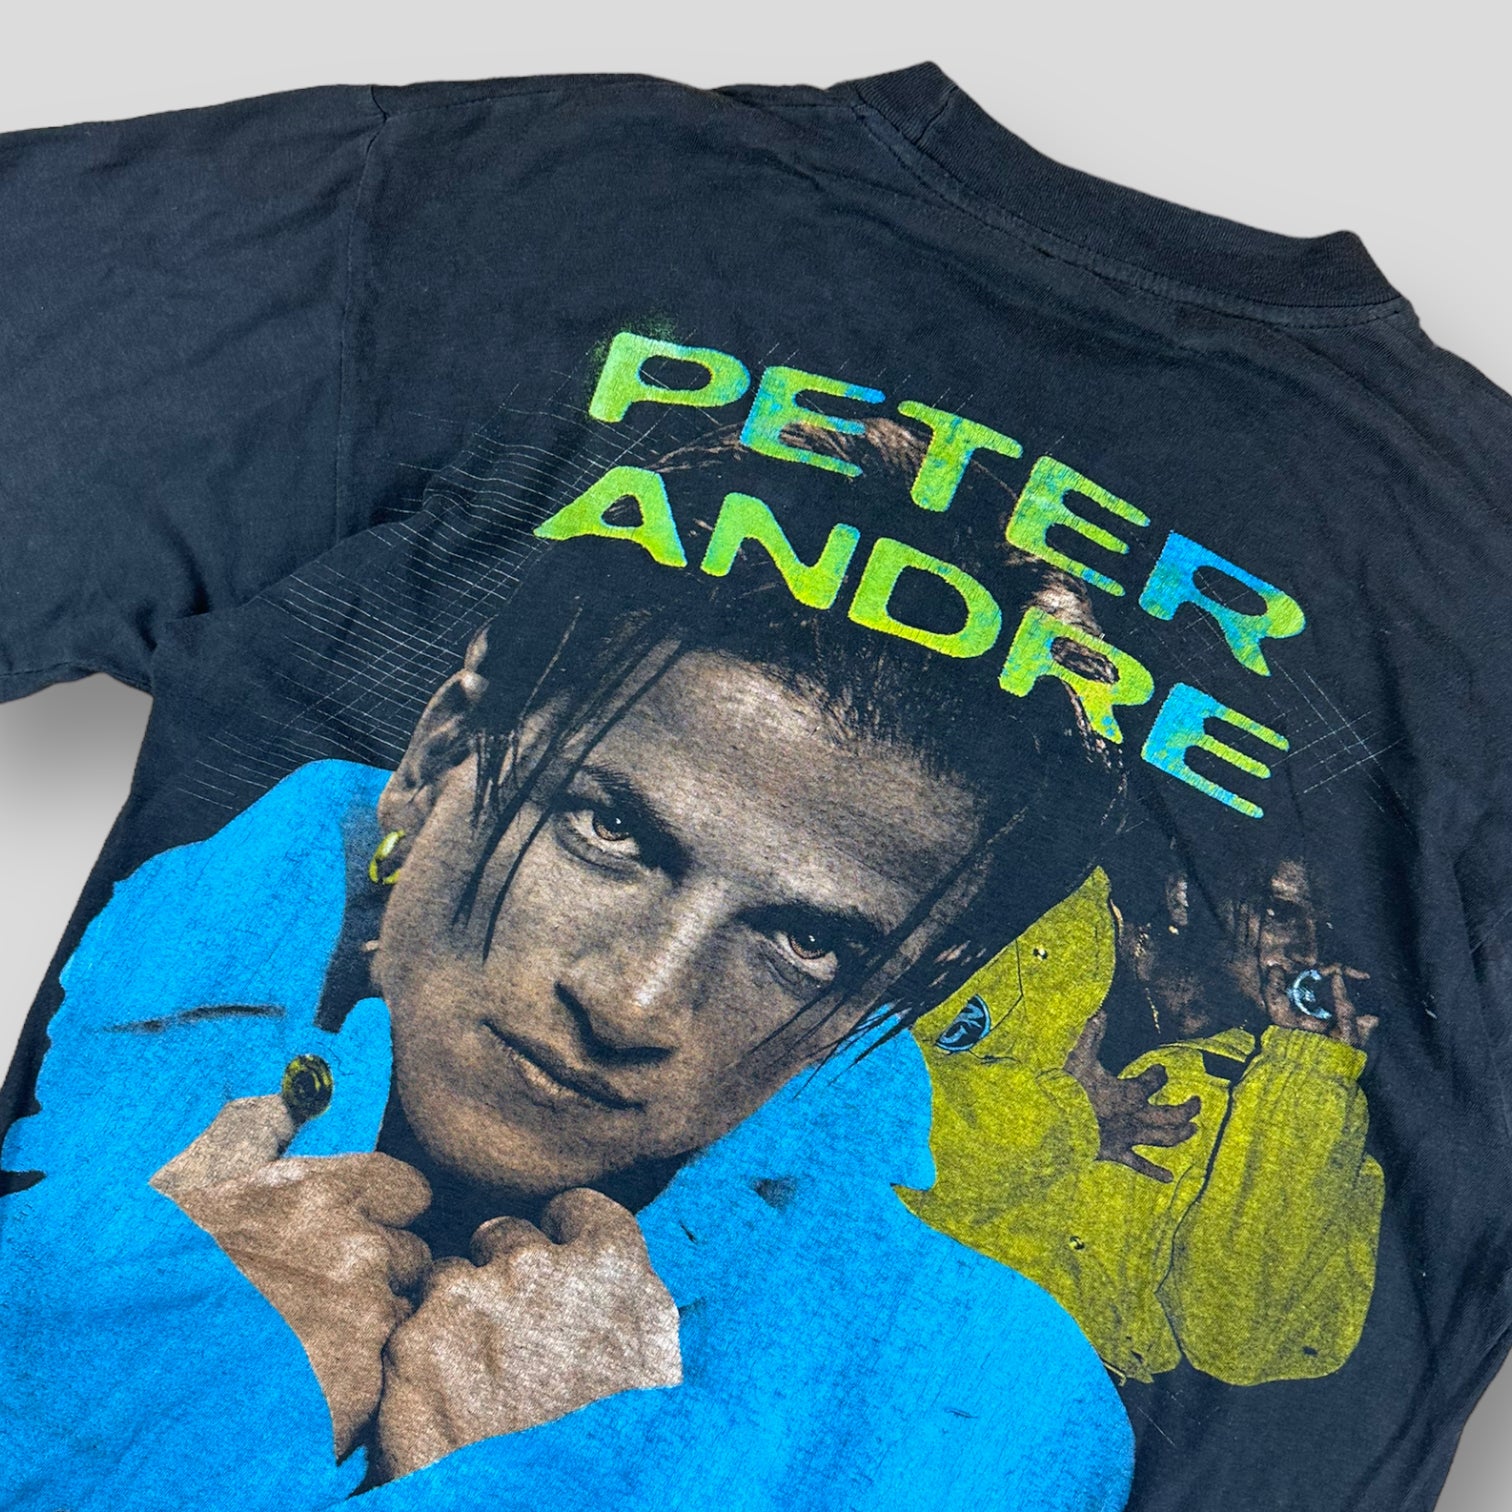 Vintage Peter Andre graphic T-shirt